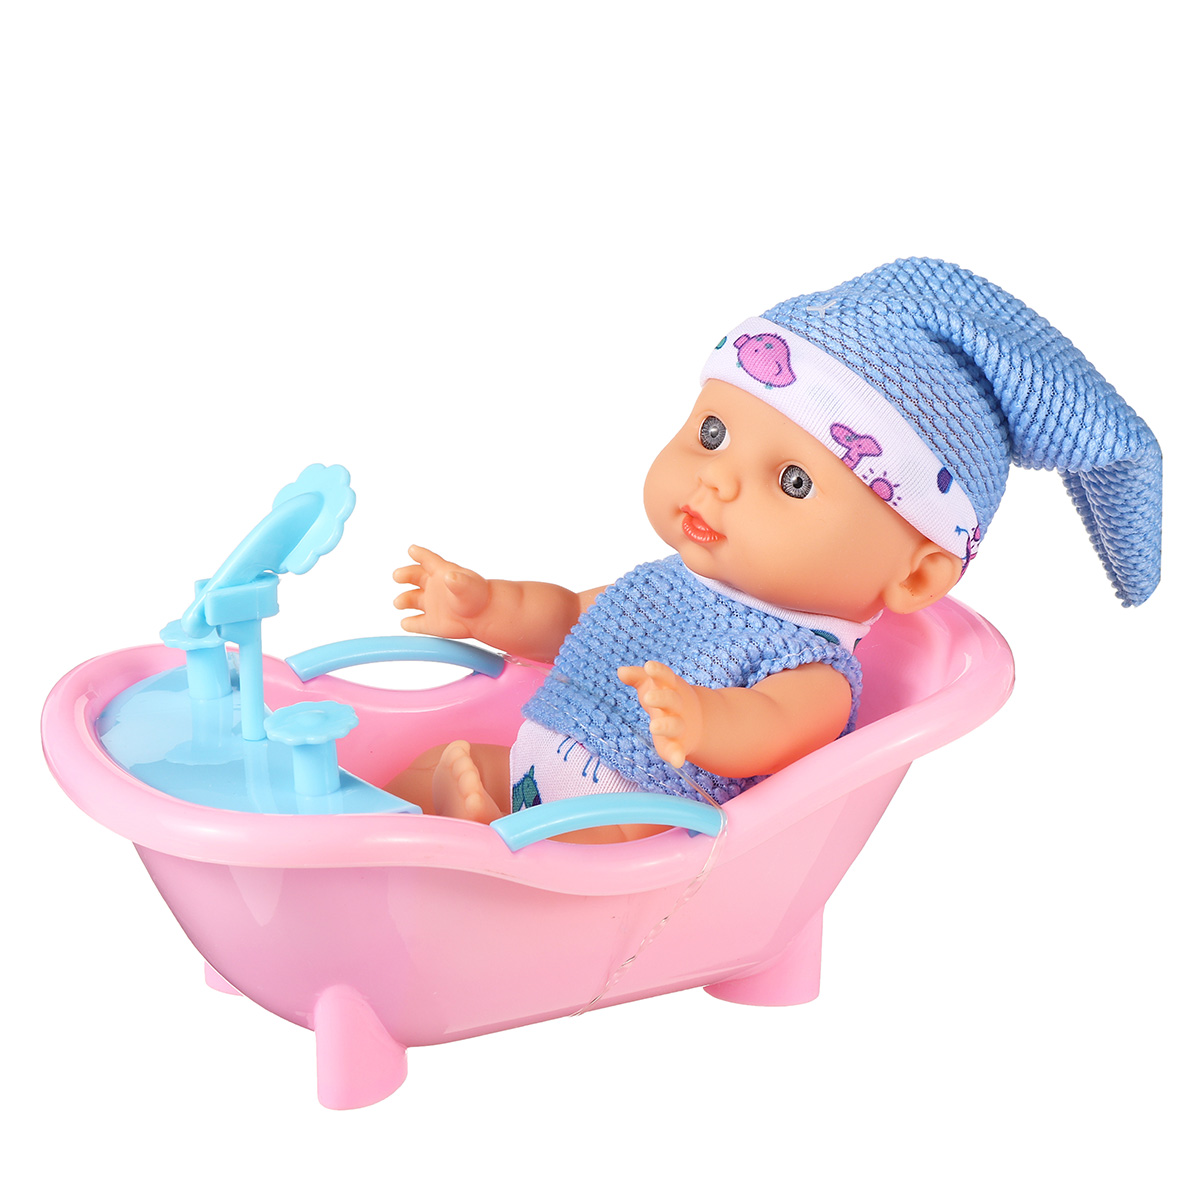 Simulation-Baby-3D-Creative-Cute-Doll-Play-House-Toy-Doll-Vinyl-Doll-Gift-1818656-7